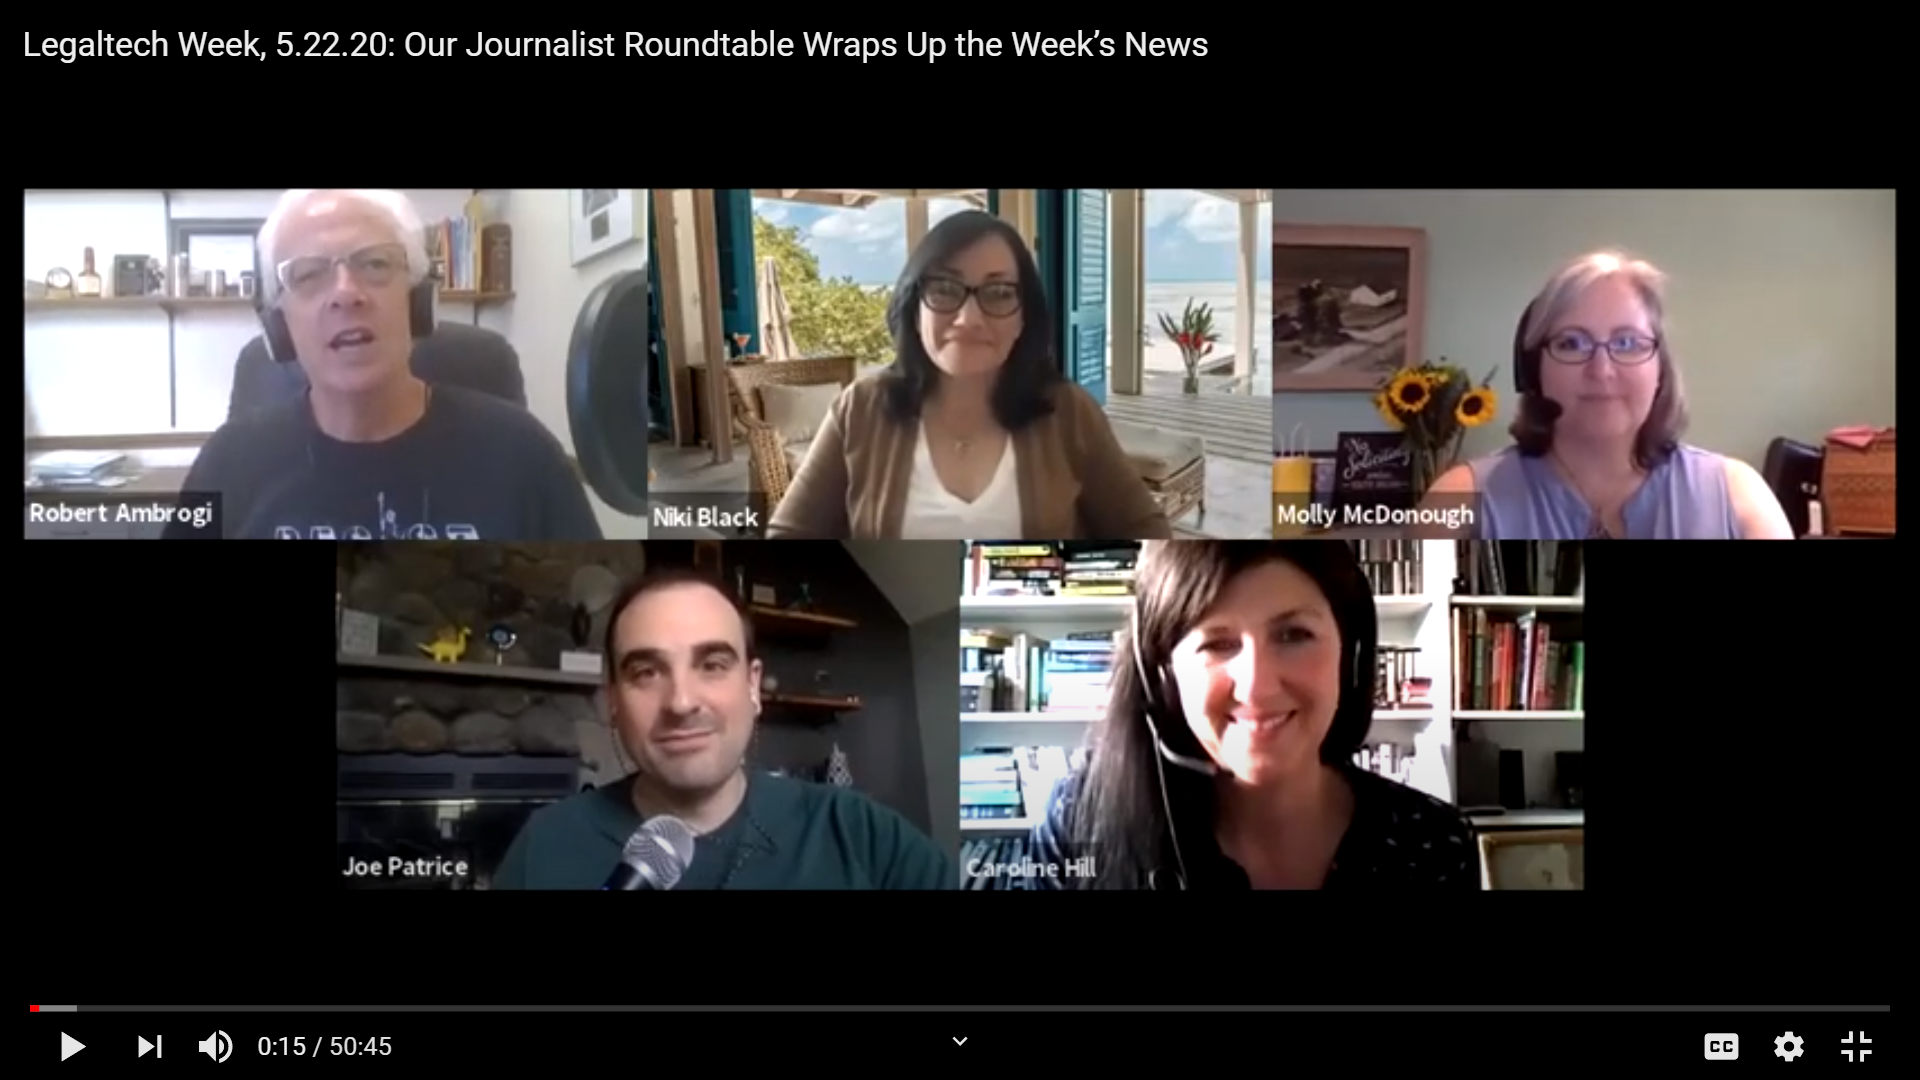 Watch or Listen to the Legaltech Week Journalist Roundtable for 5.22.20